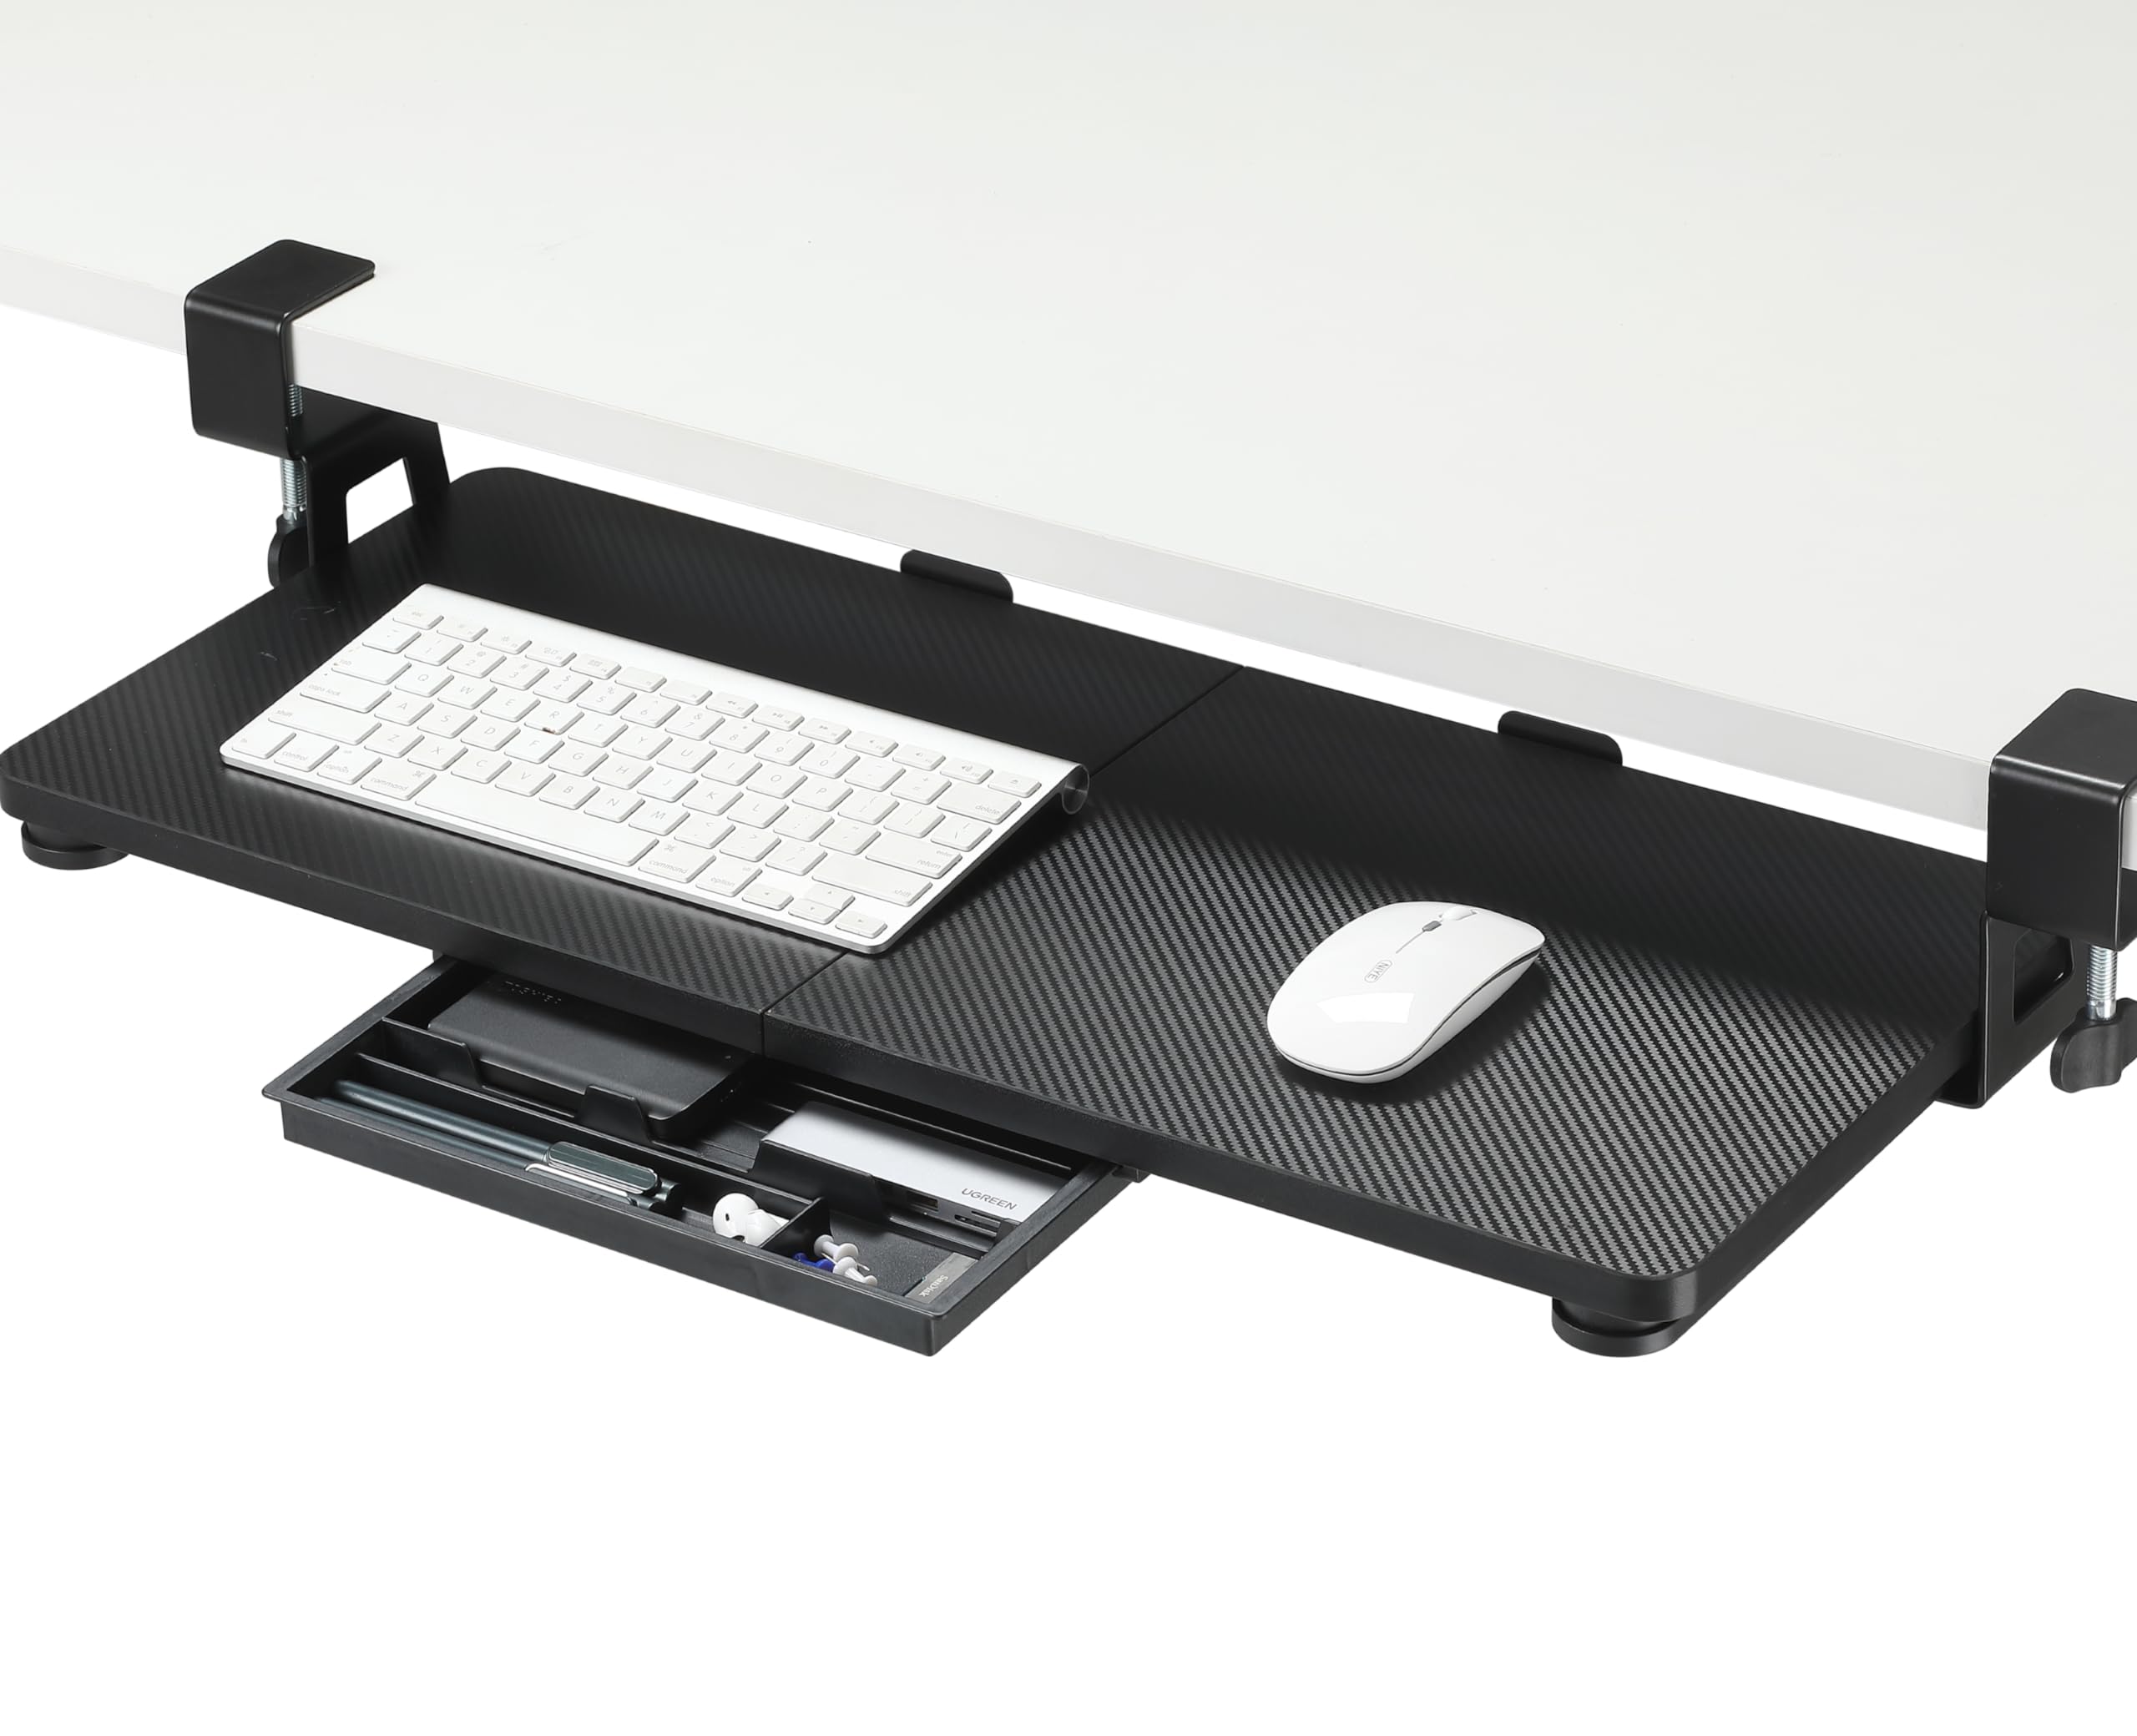 ETHU Keyboard Tray Under Desk, 26.77" X 11.81" Large Size Keyboard Tray with C Clamp-on Mount Easy to Install, Computer Keyboard Stand, Ergonomic Keyboard Tray for Home and Office (Carbon)